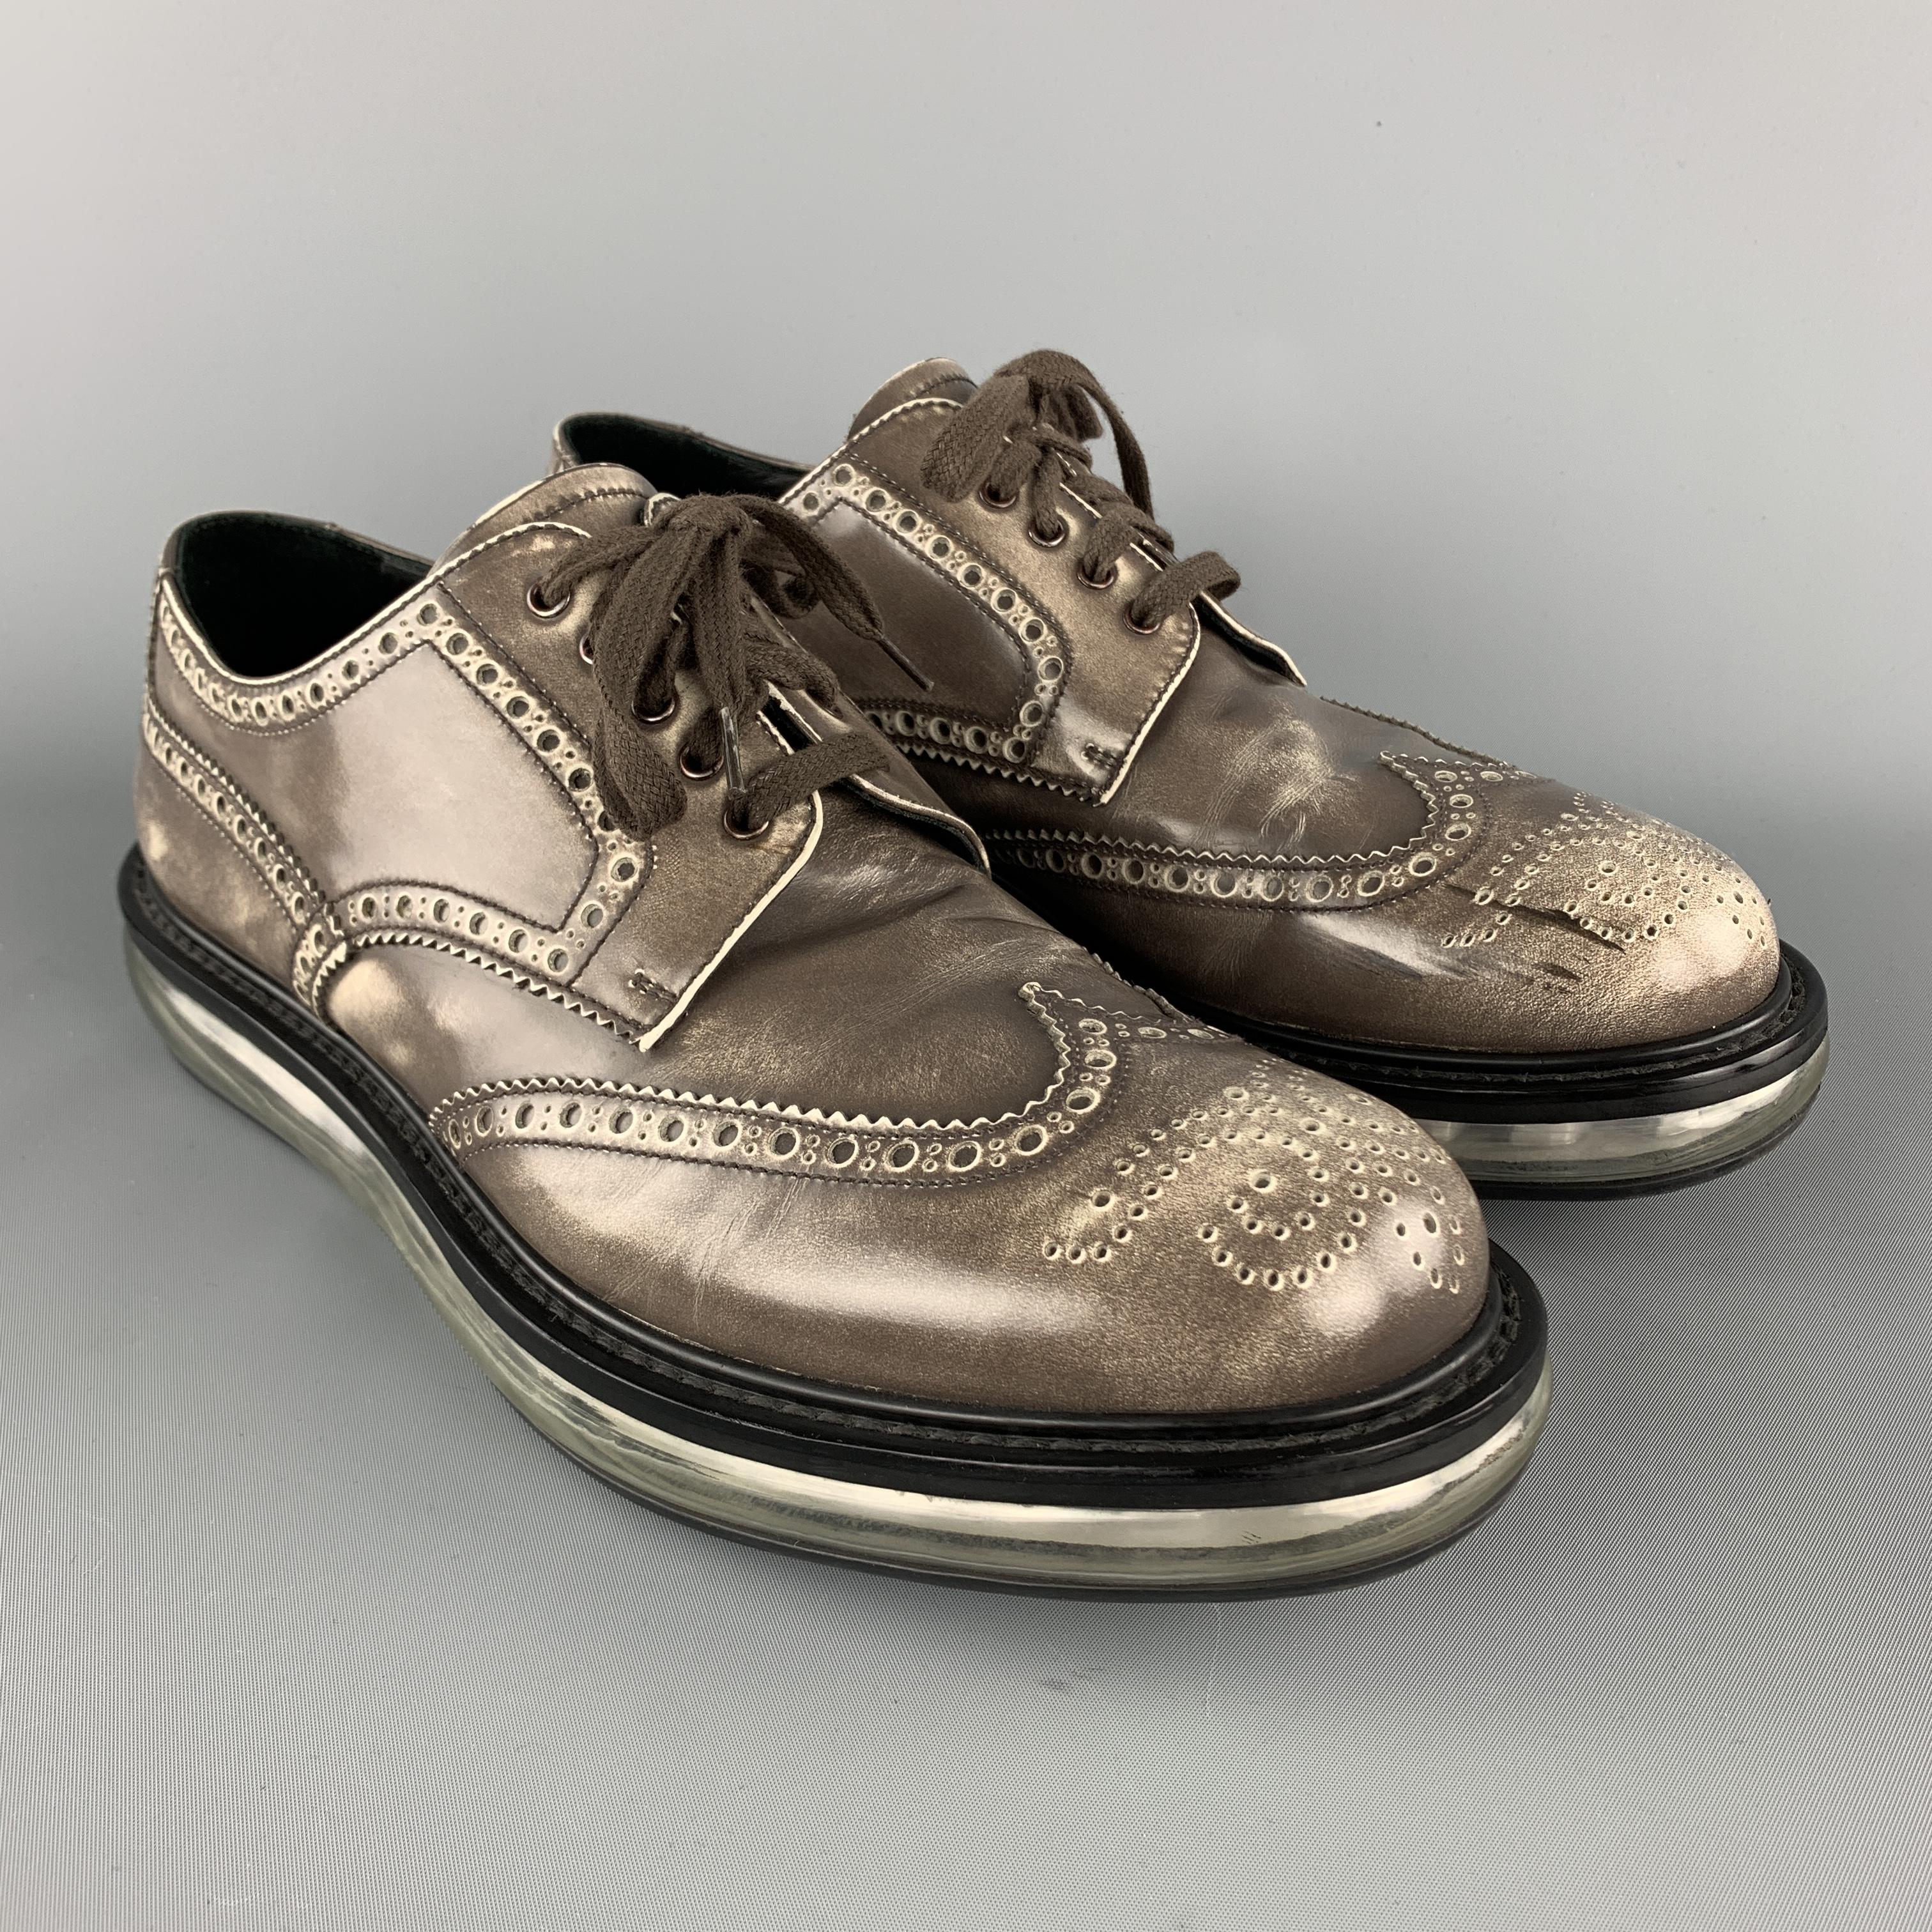 PRADA oxford lace up shoes comes in taupe and white tones in leather material, featuring an antique style, wingtip, a branded insole and a transparent sole. As is. Made in Italy.

Very Good Pre-Owned Condition.
Marked: UK 9.5  2EE 098 

Outsole: 13